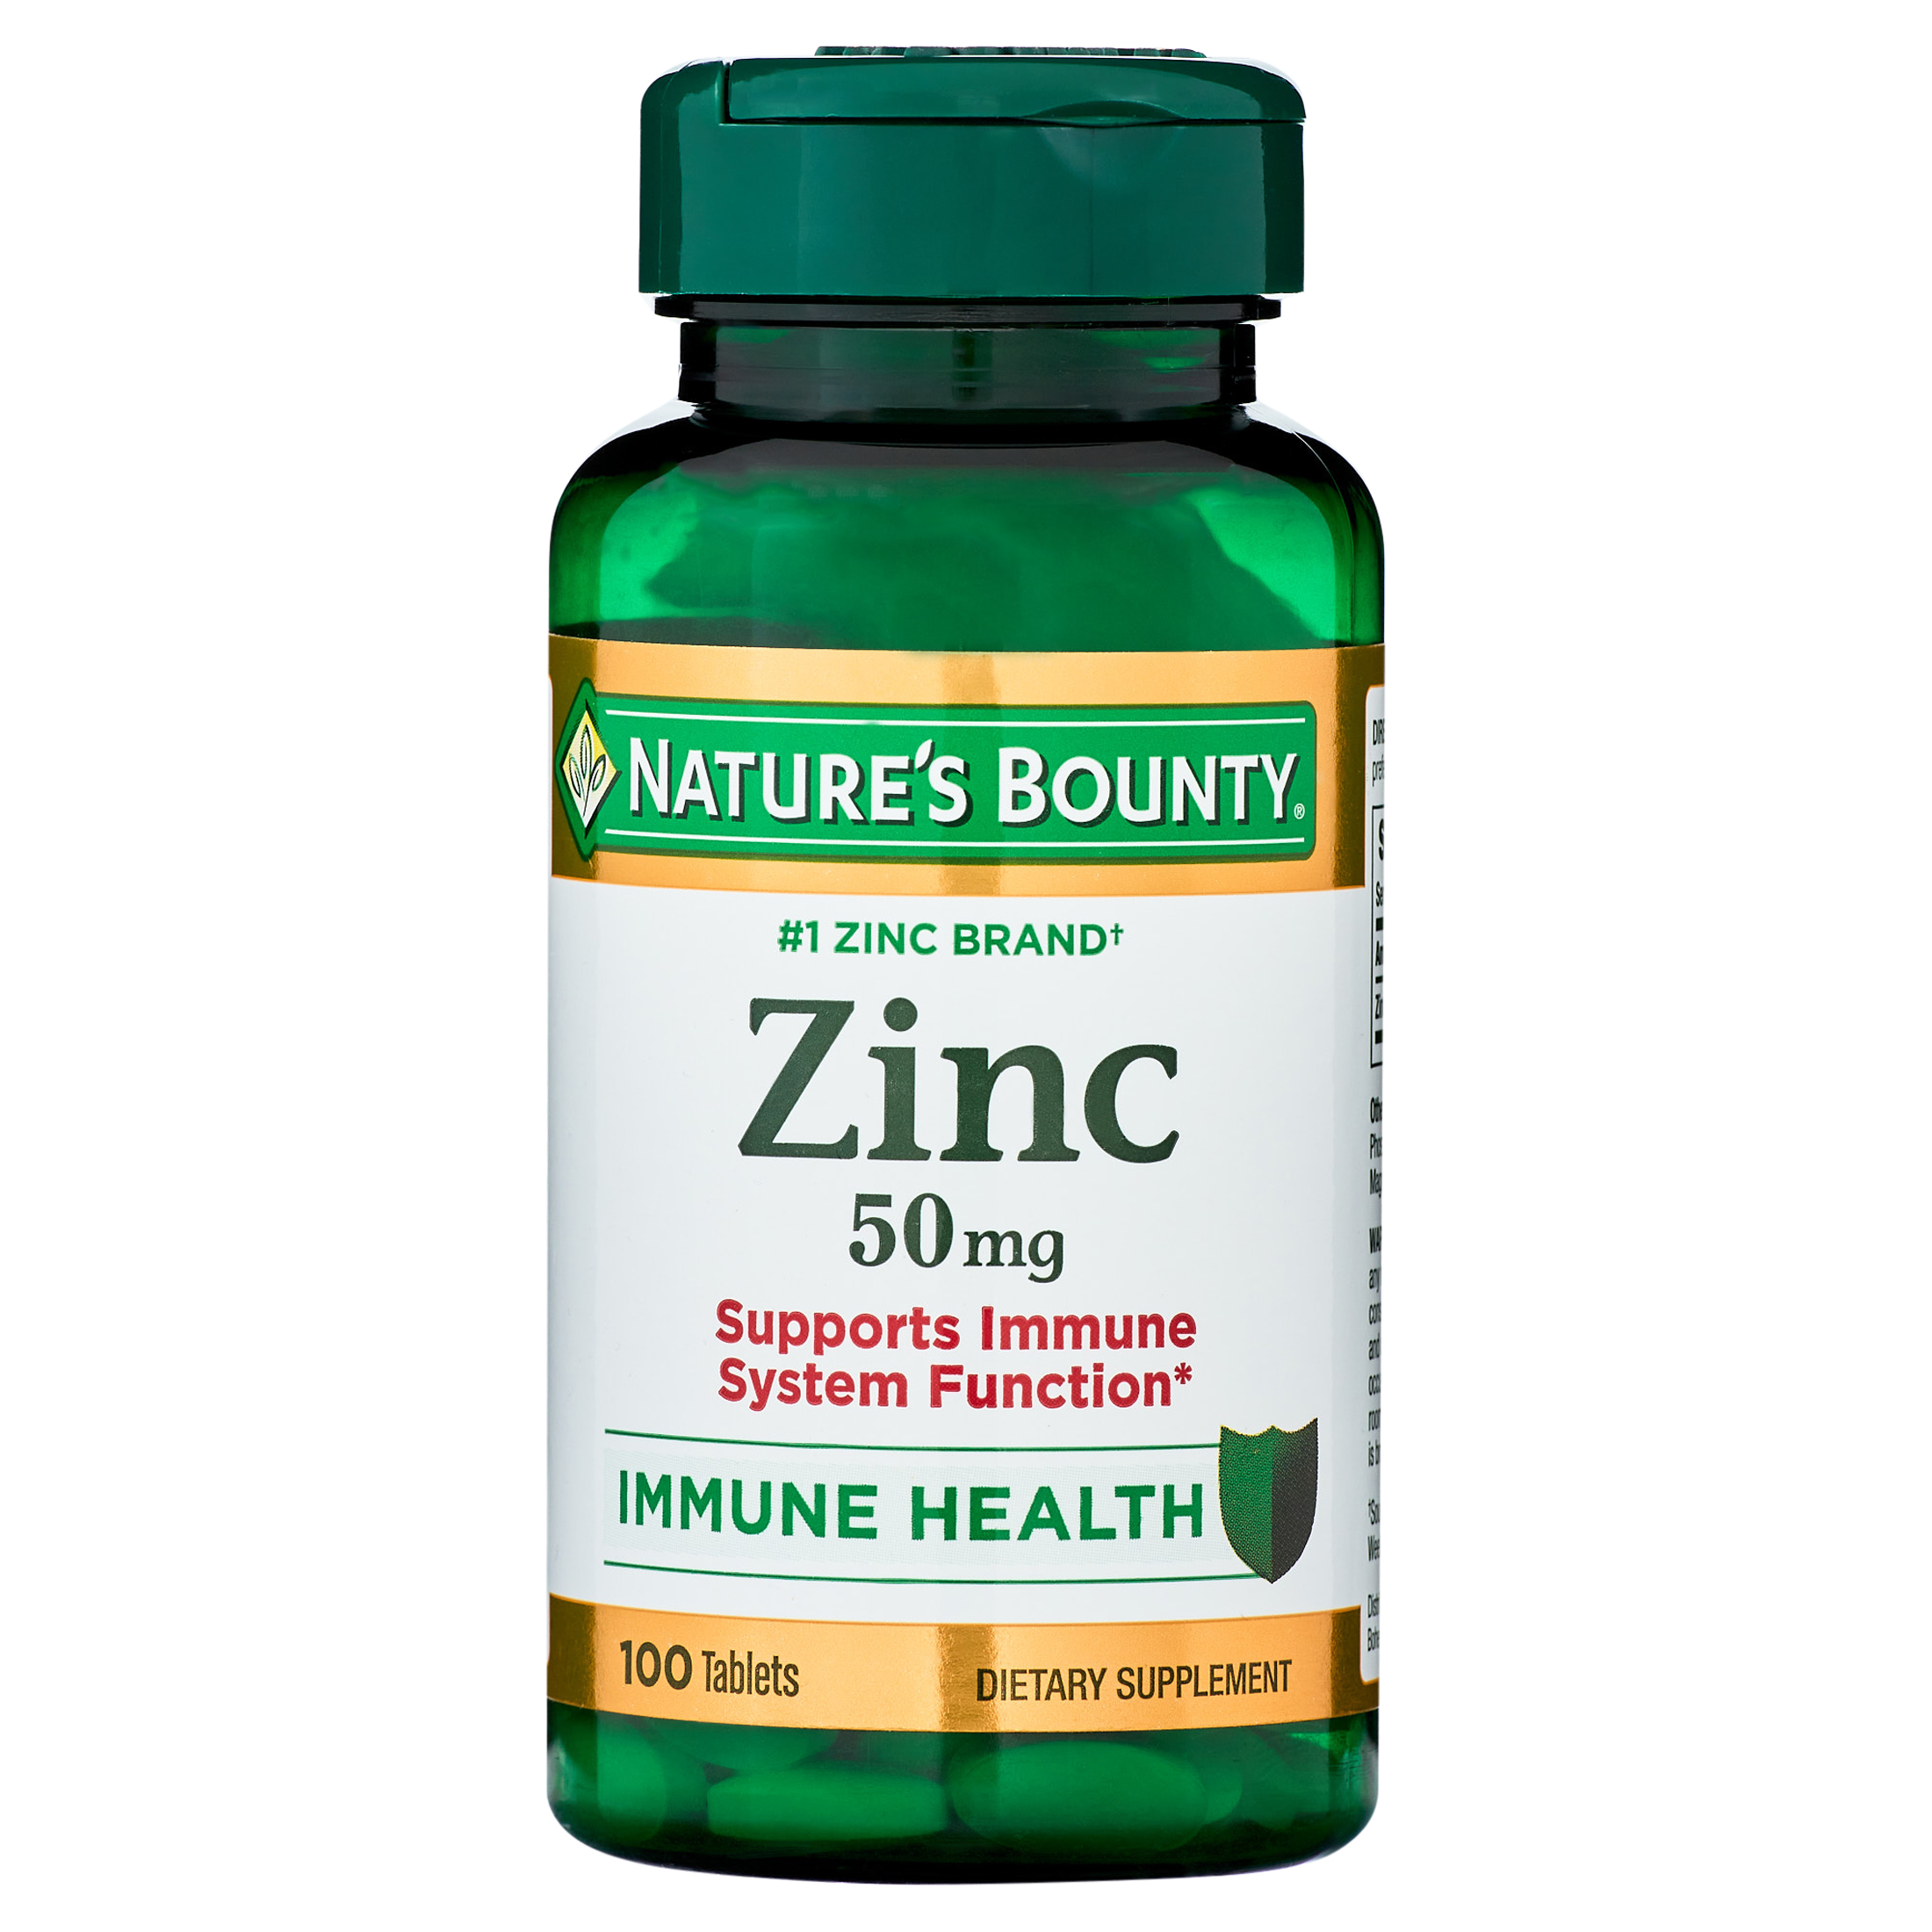 Nature’s Bounty Zinc, Immune Support Supplement, 50 mg, 100 Caplets - image 1 of 11